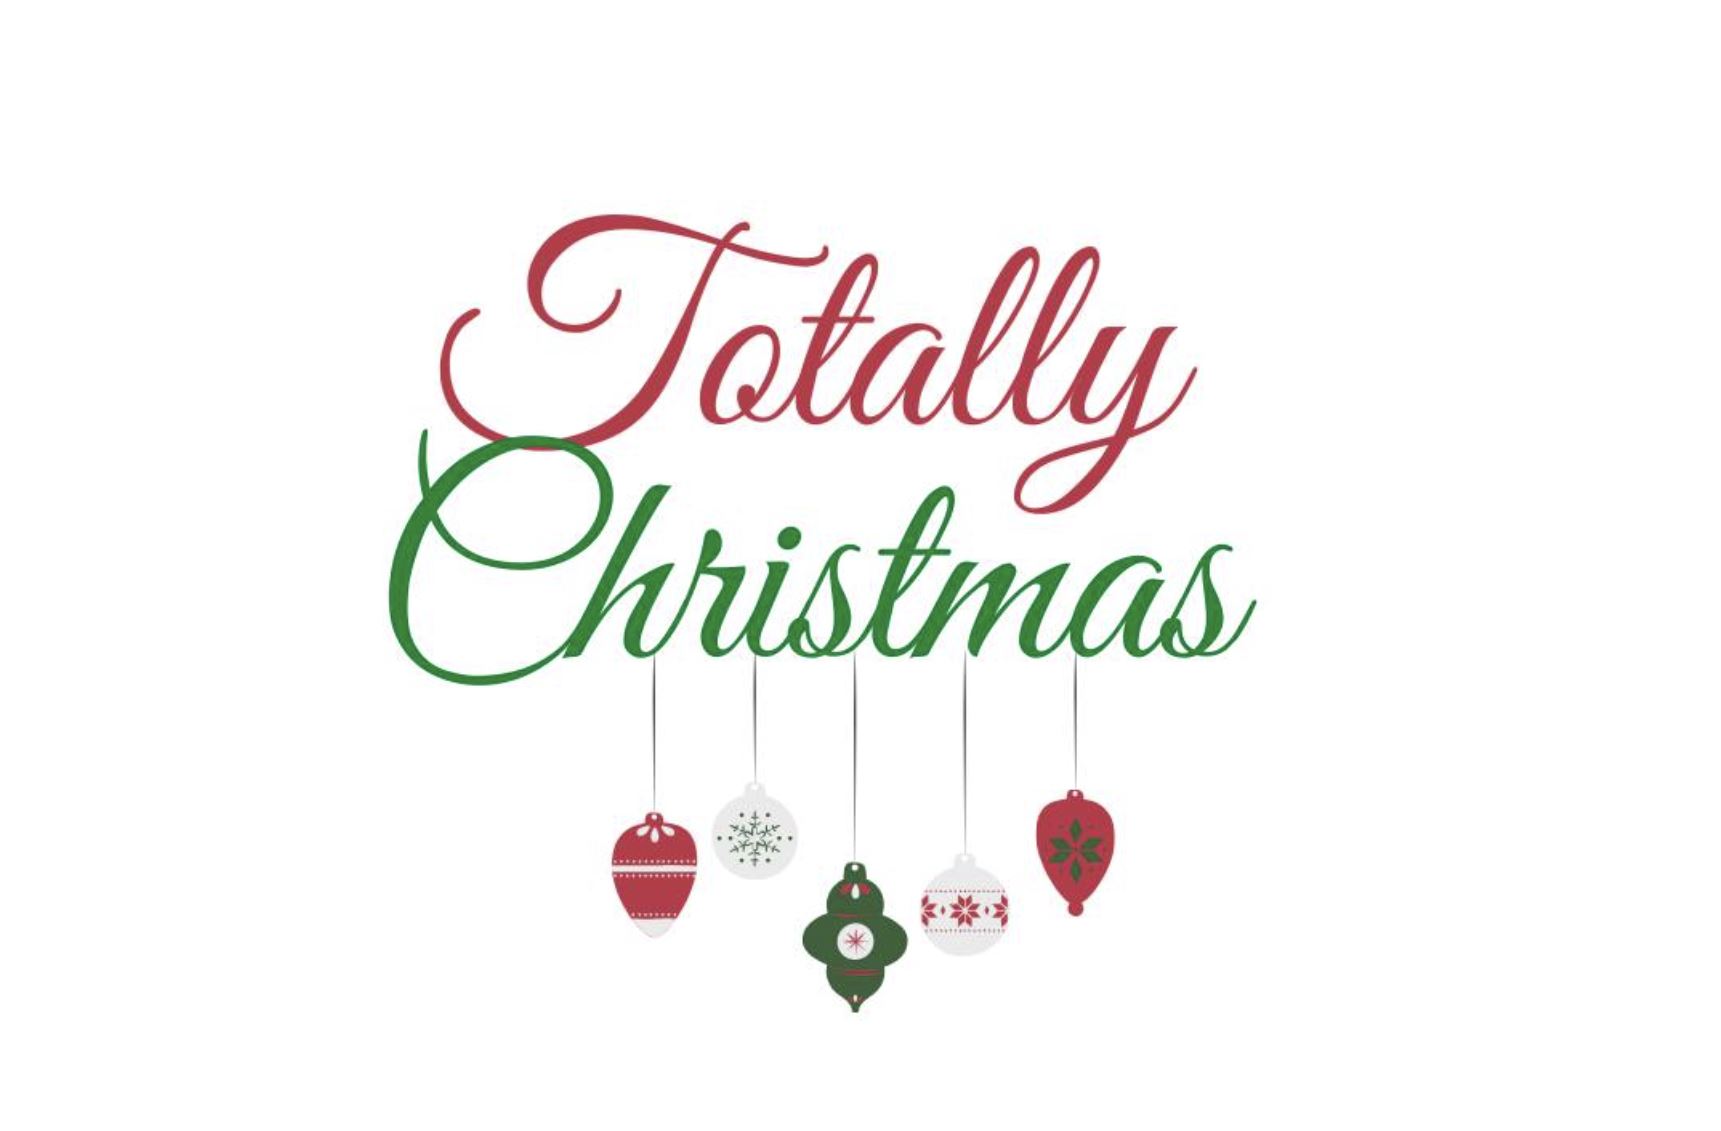 84 vendors signed on for Totally Christmas this weekend